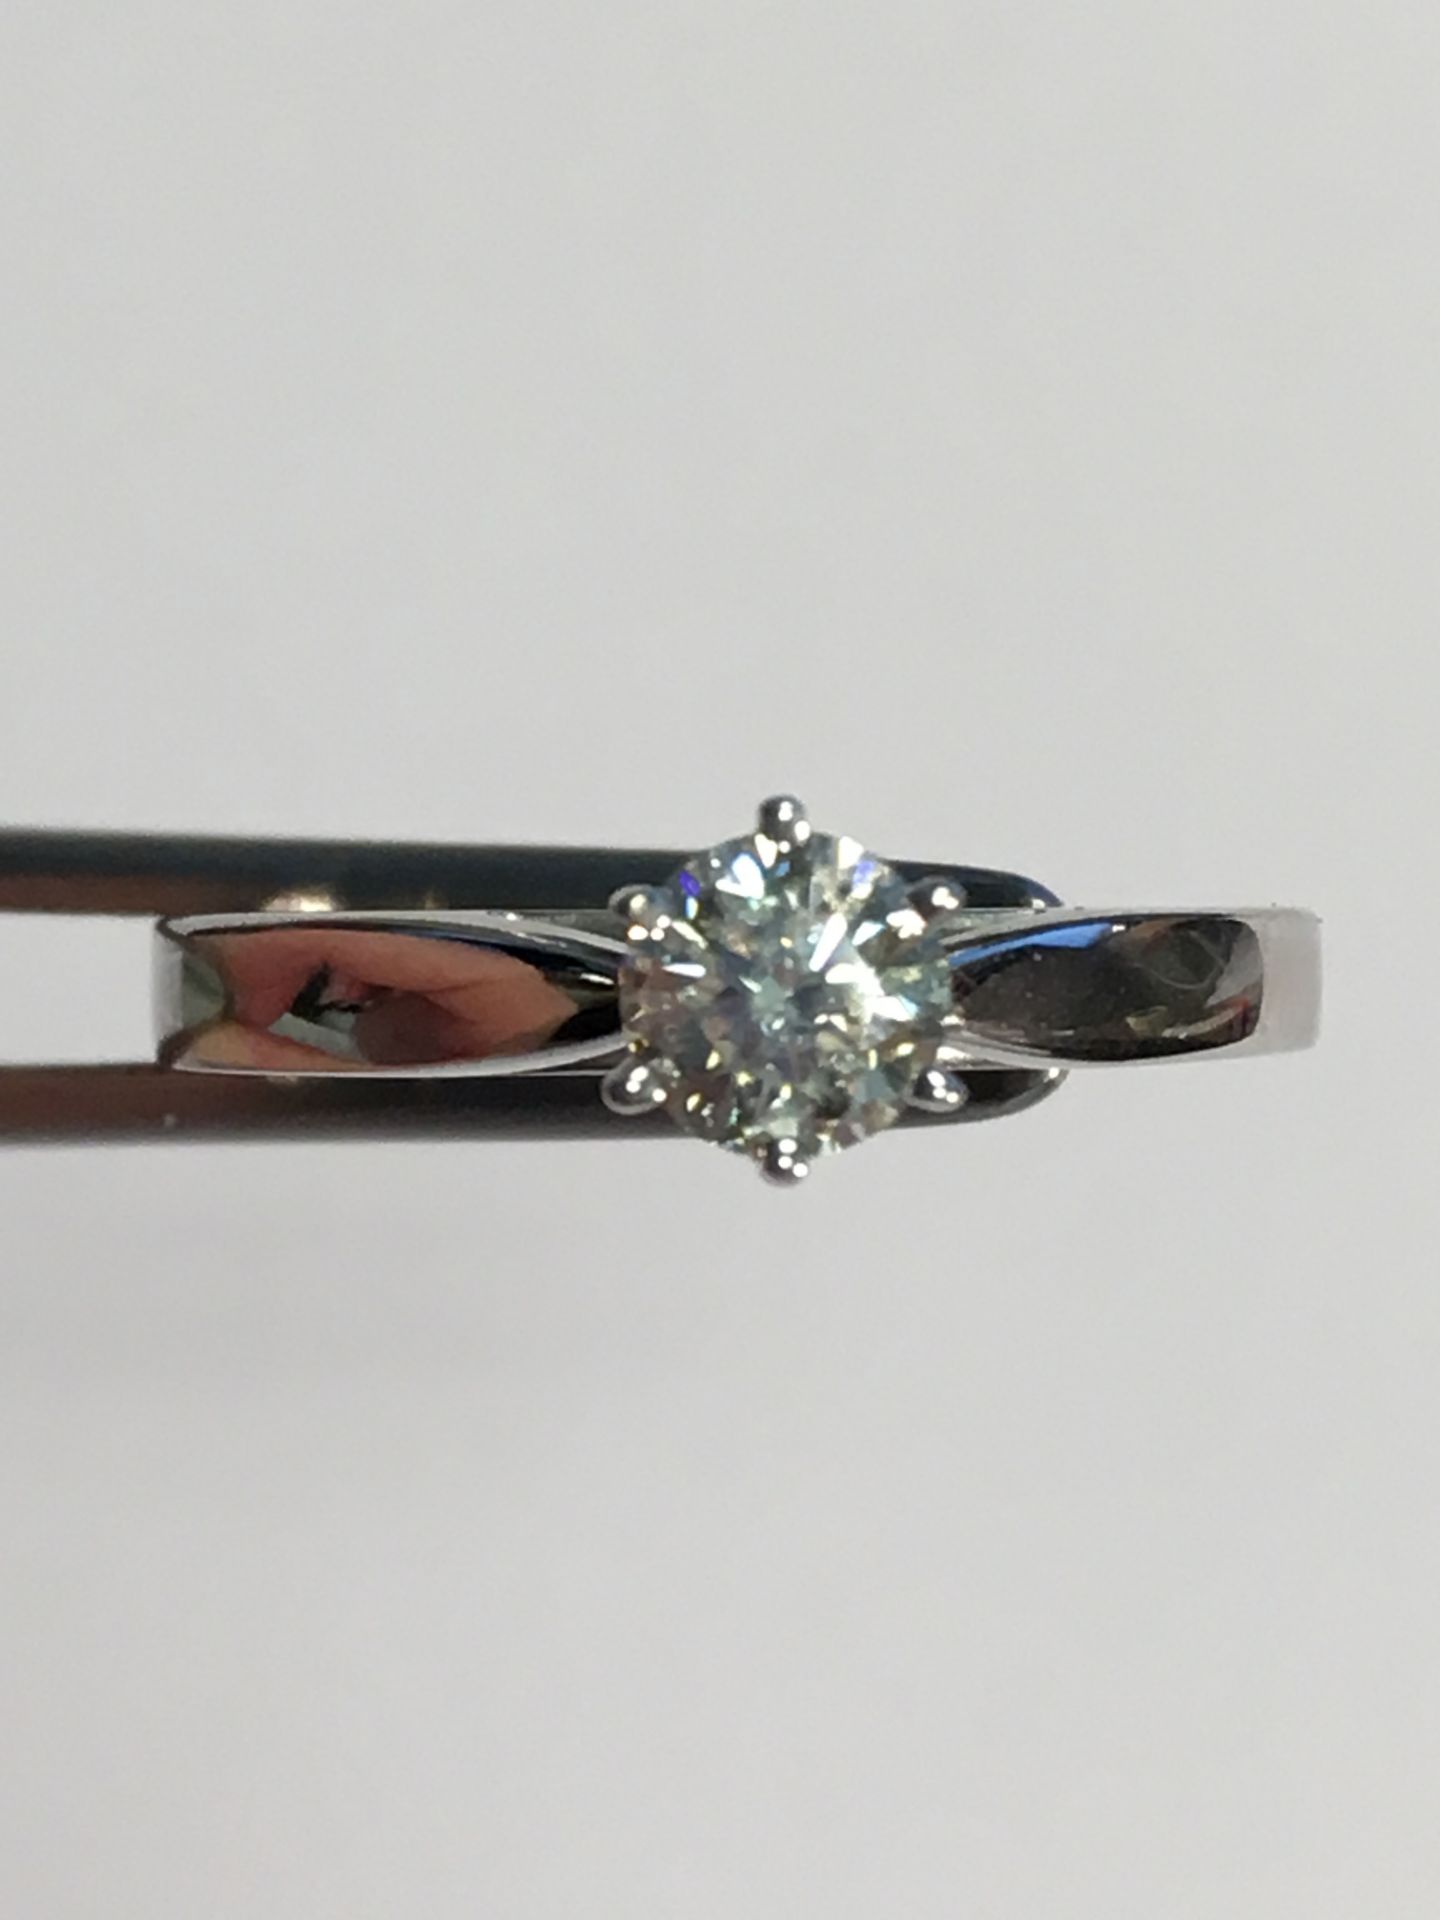 14K White Gold Solitaire 0.4Ct Diamond Ring - Image 3 of 3